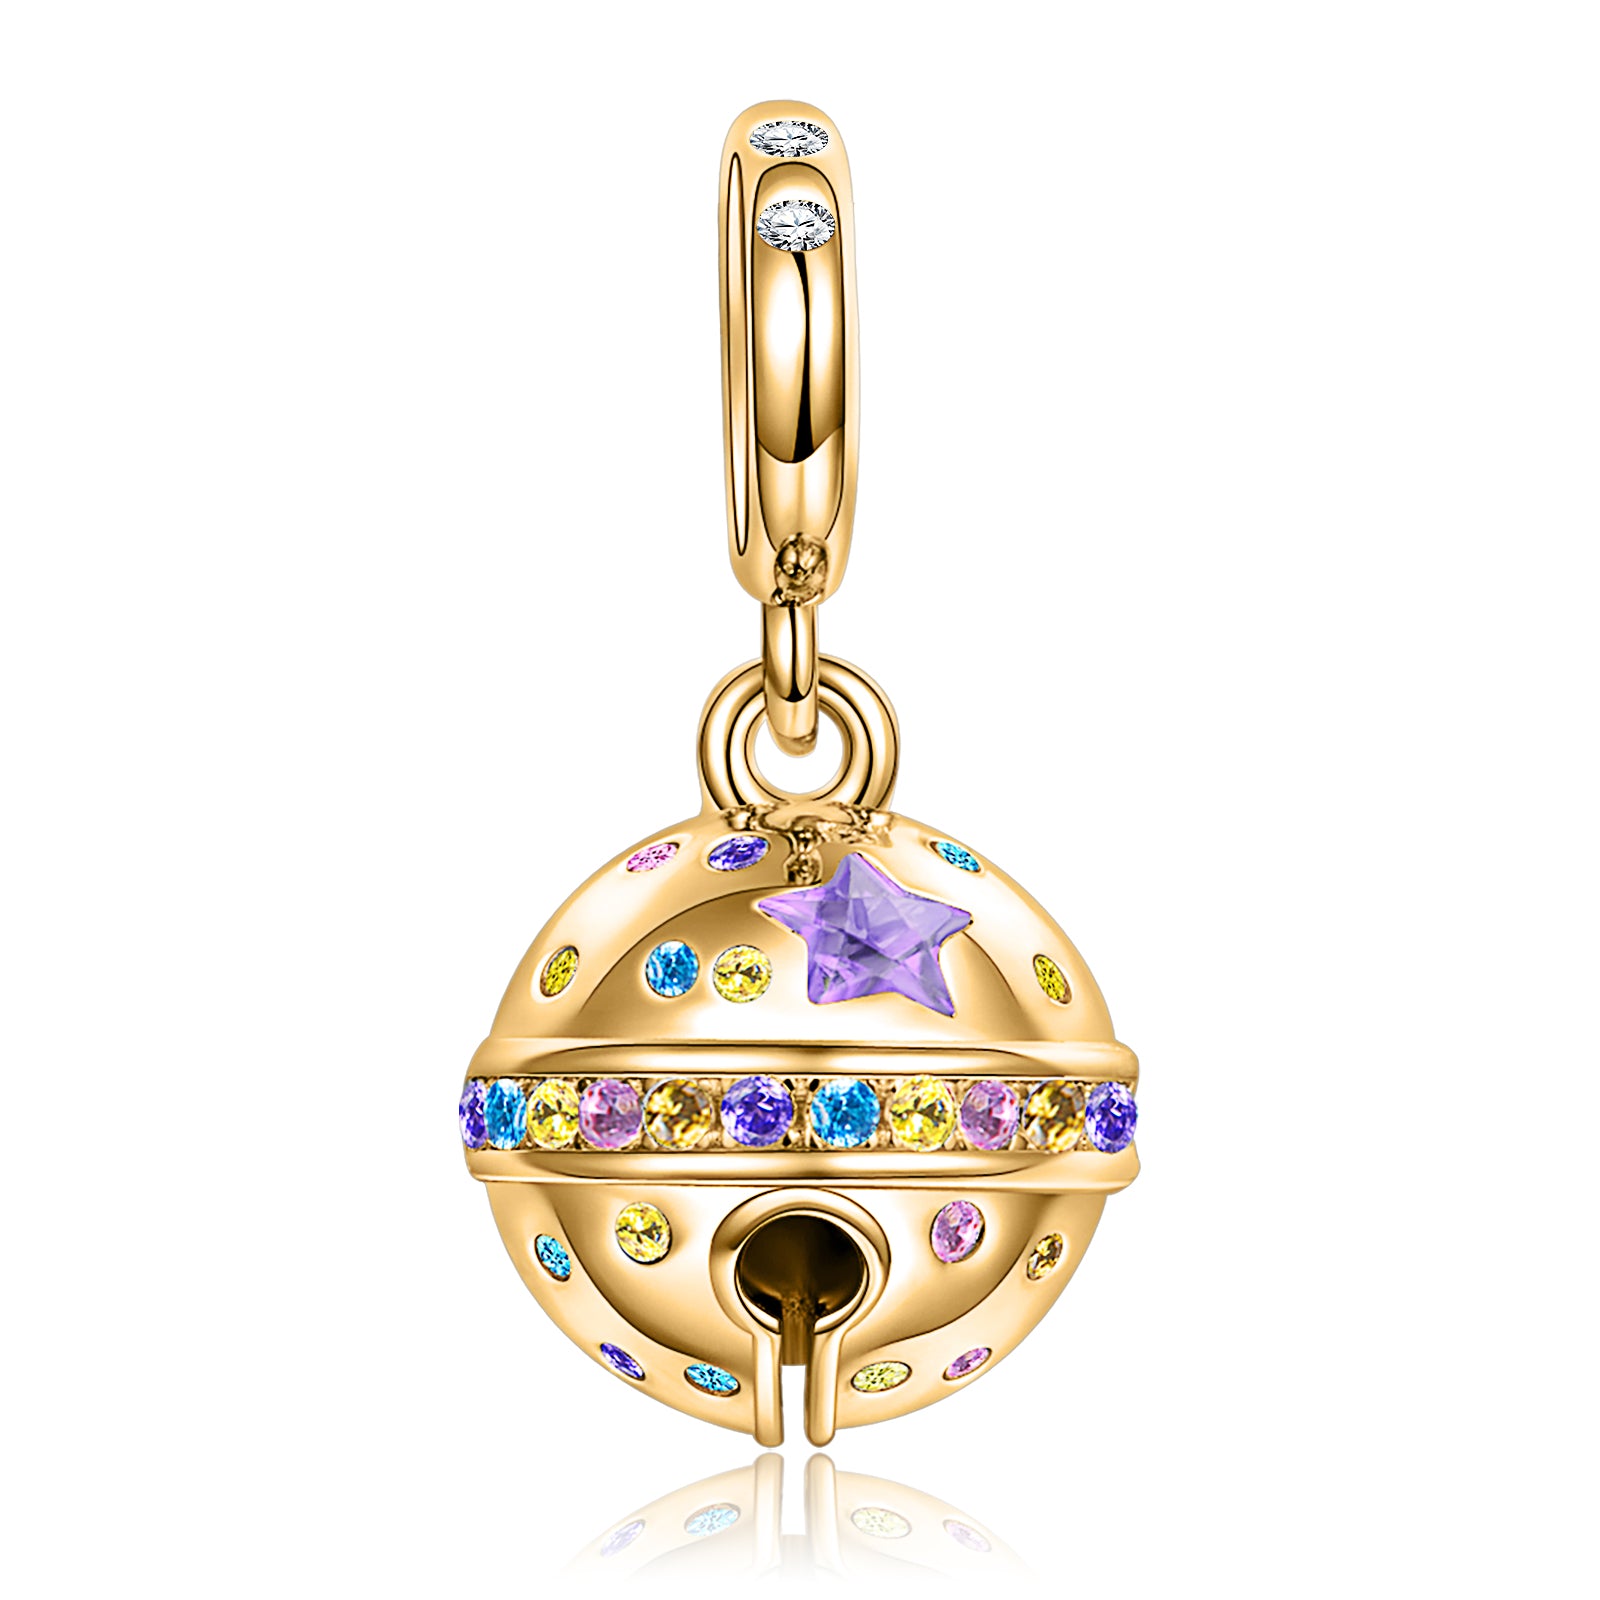 NINAQUEEN Jingle Bell Series Charm Gold Charm fashion jewelry for her